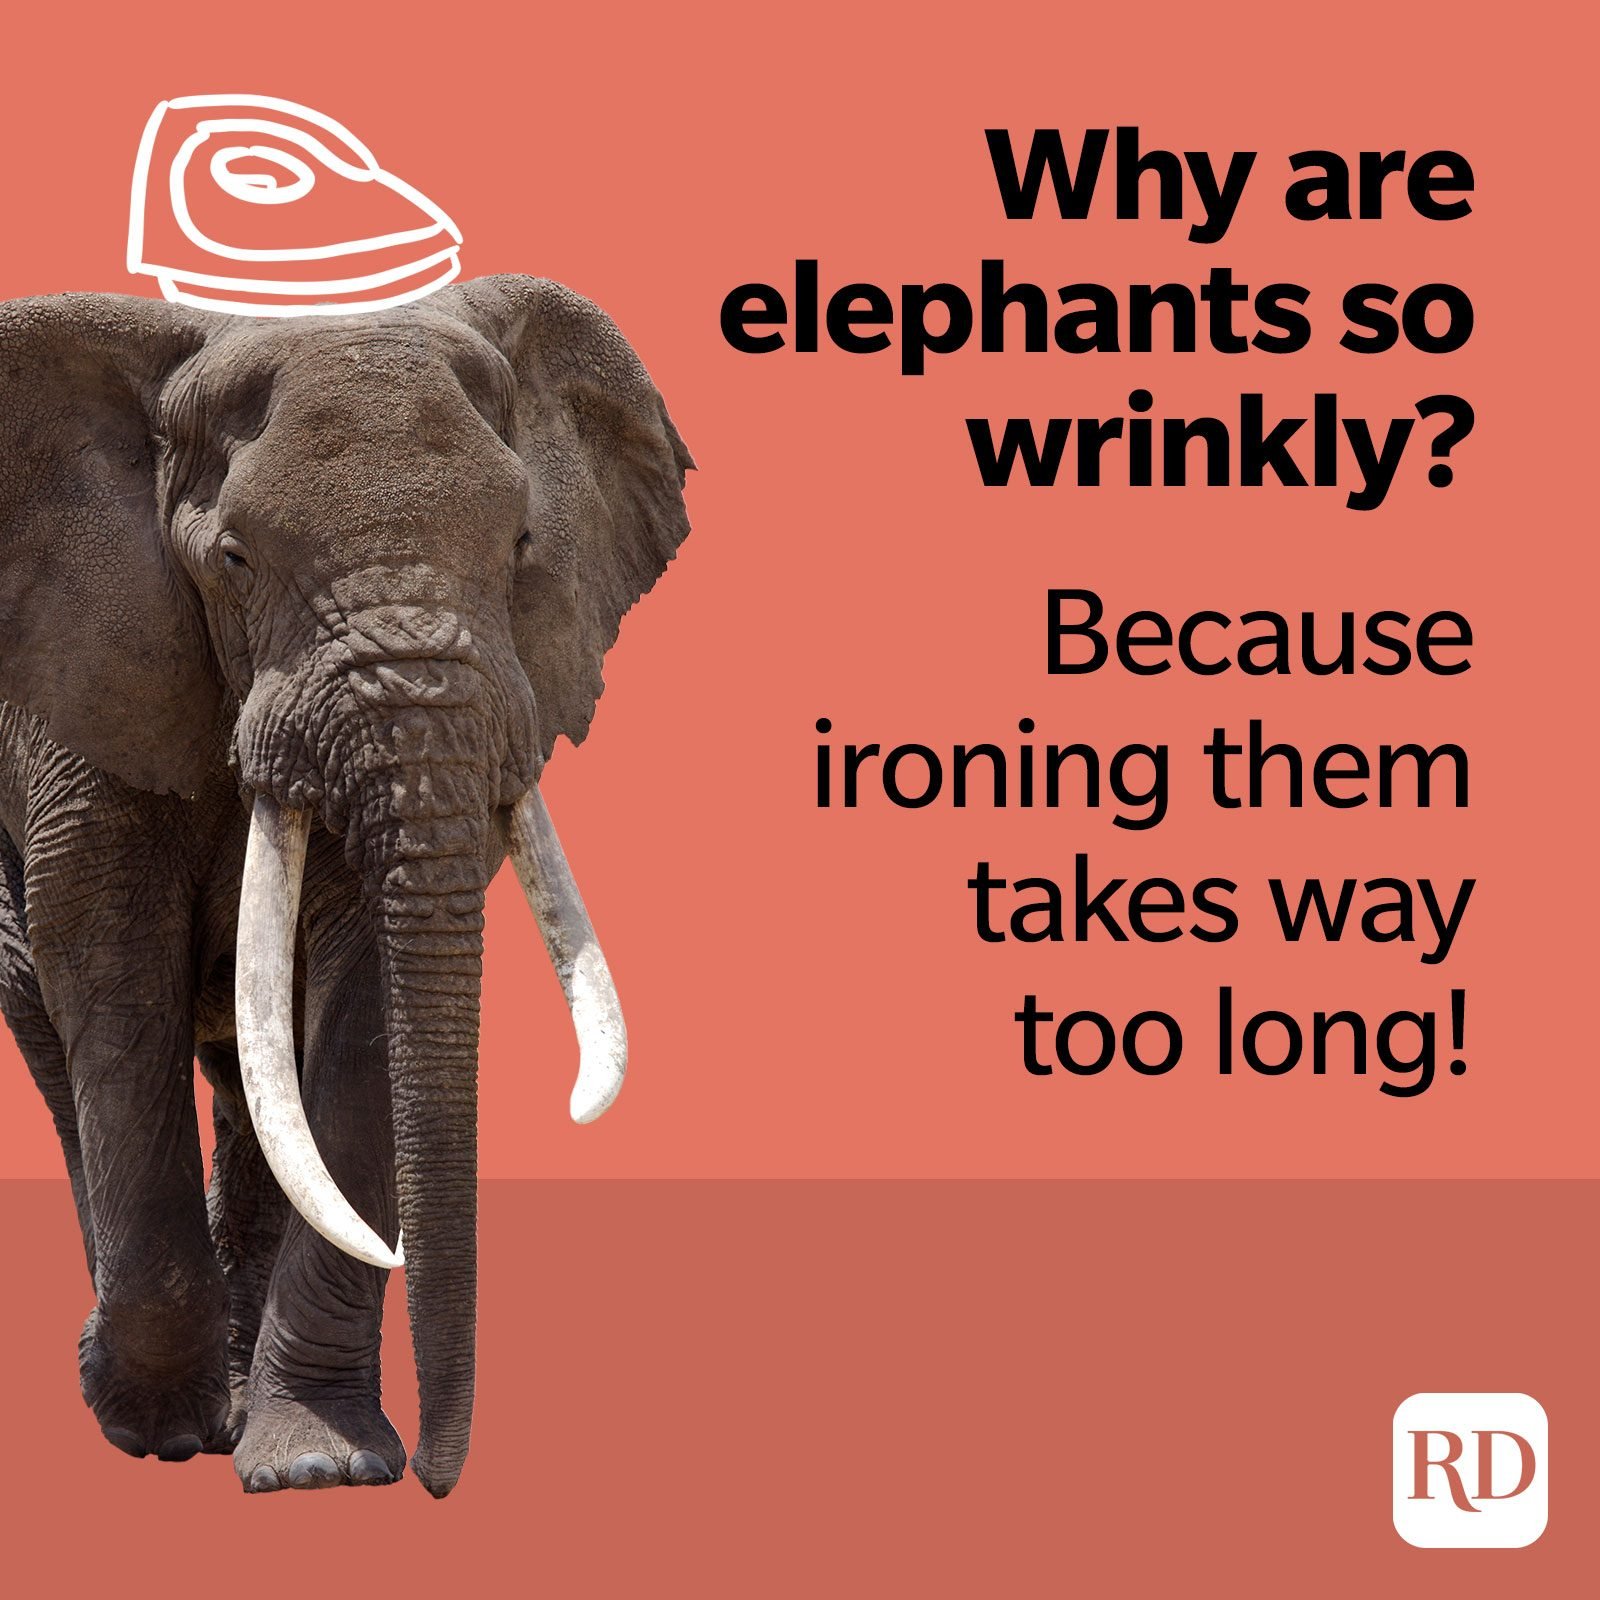 Why are elephants so wrinkly? Because ironing them takes way too long.